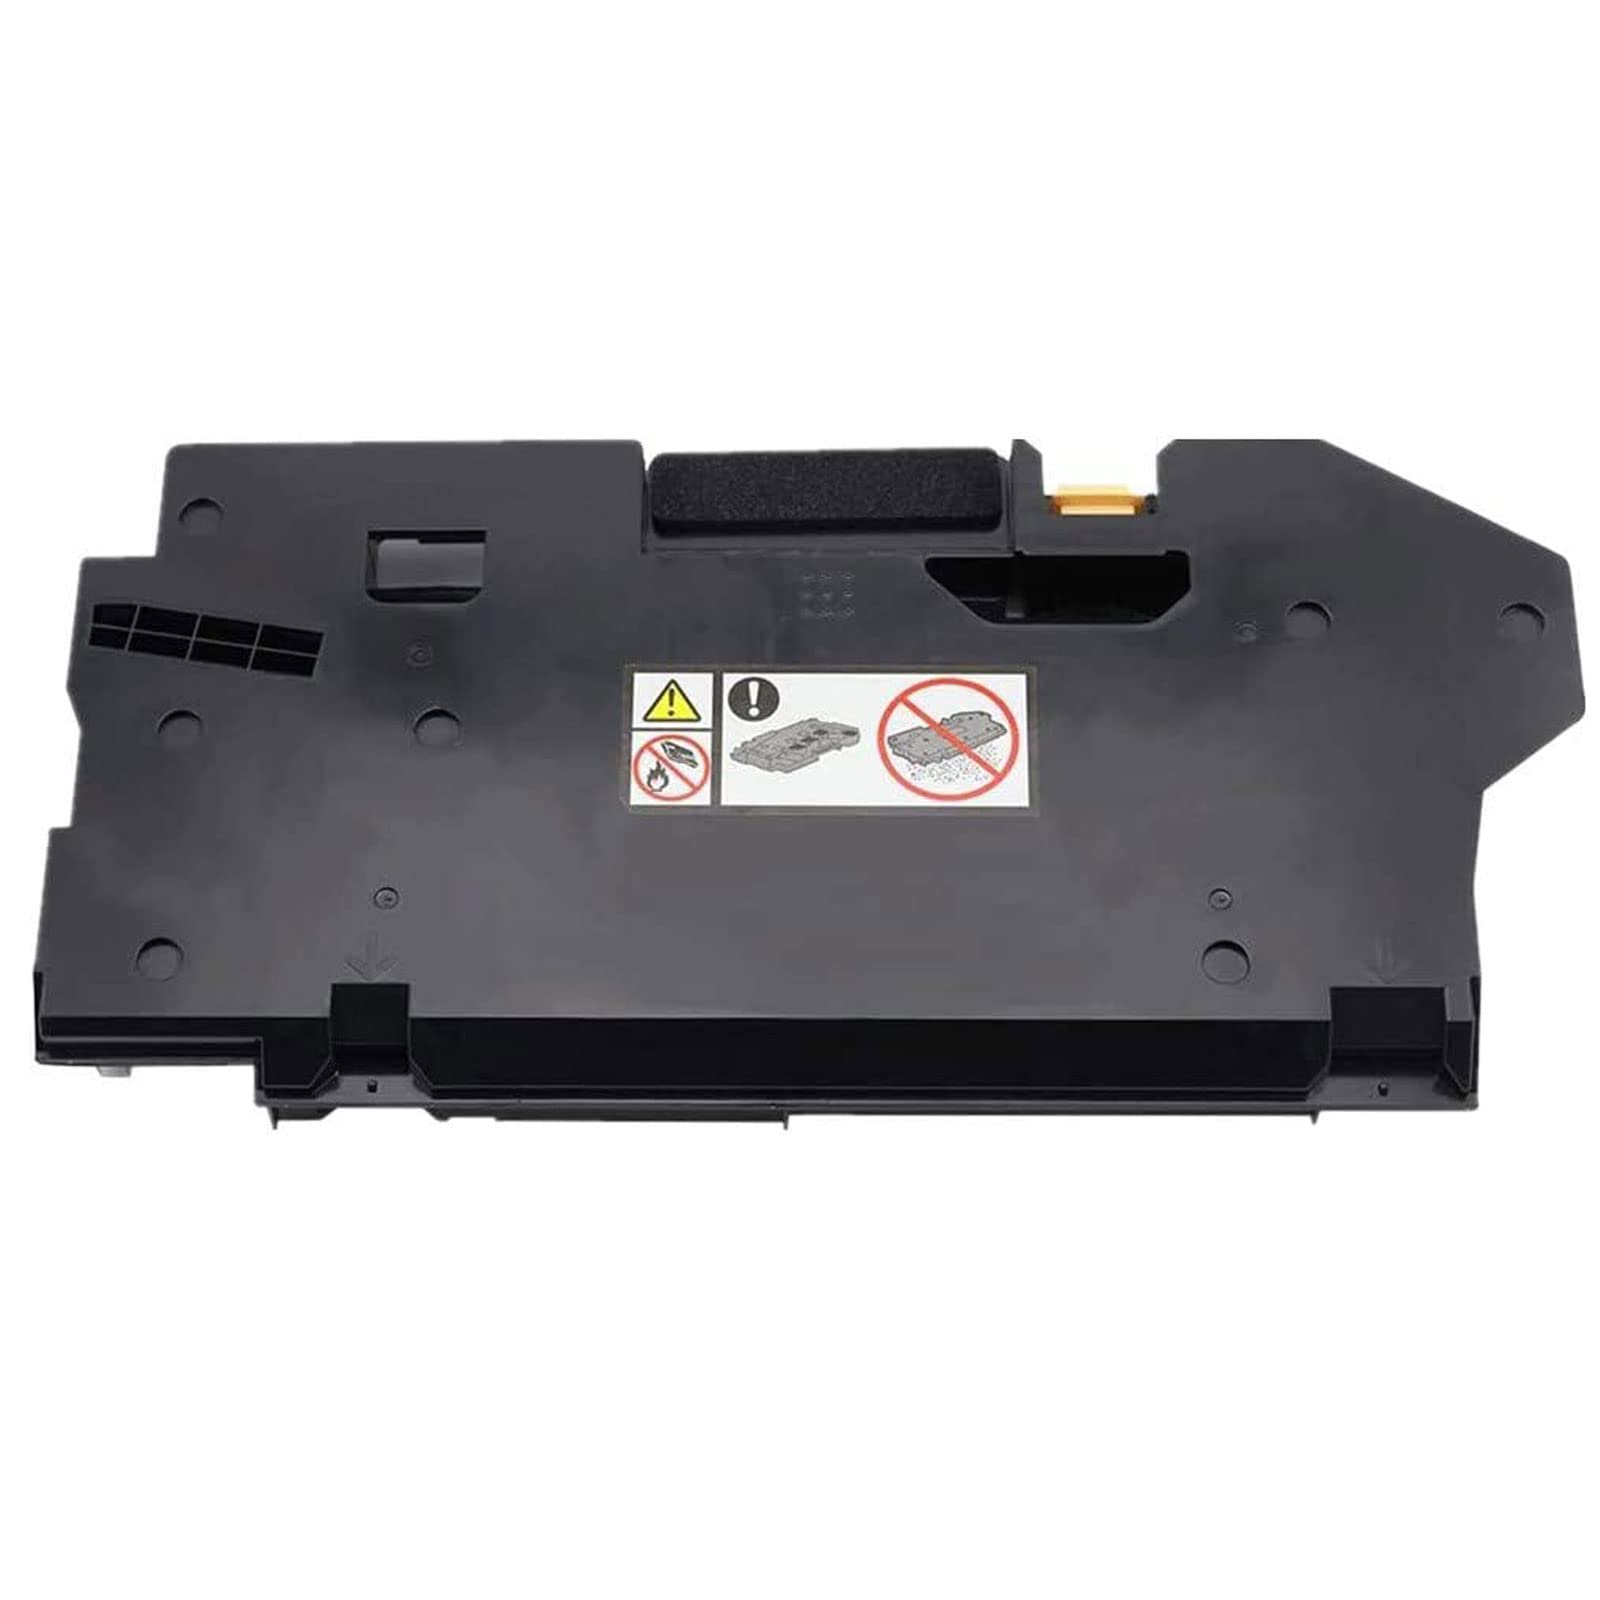 Tankard compatible Phaser 6510 Workcentre 6515 Waste Toner Box container for Xerox Phaser 6510 Workcentre 6515 VersaLink c500 c5